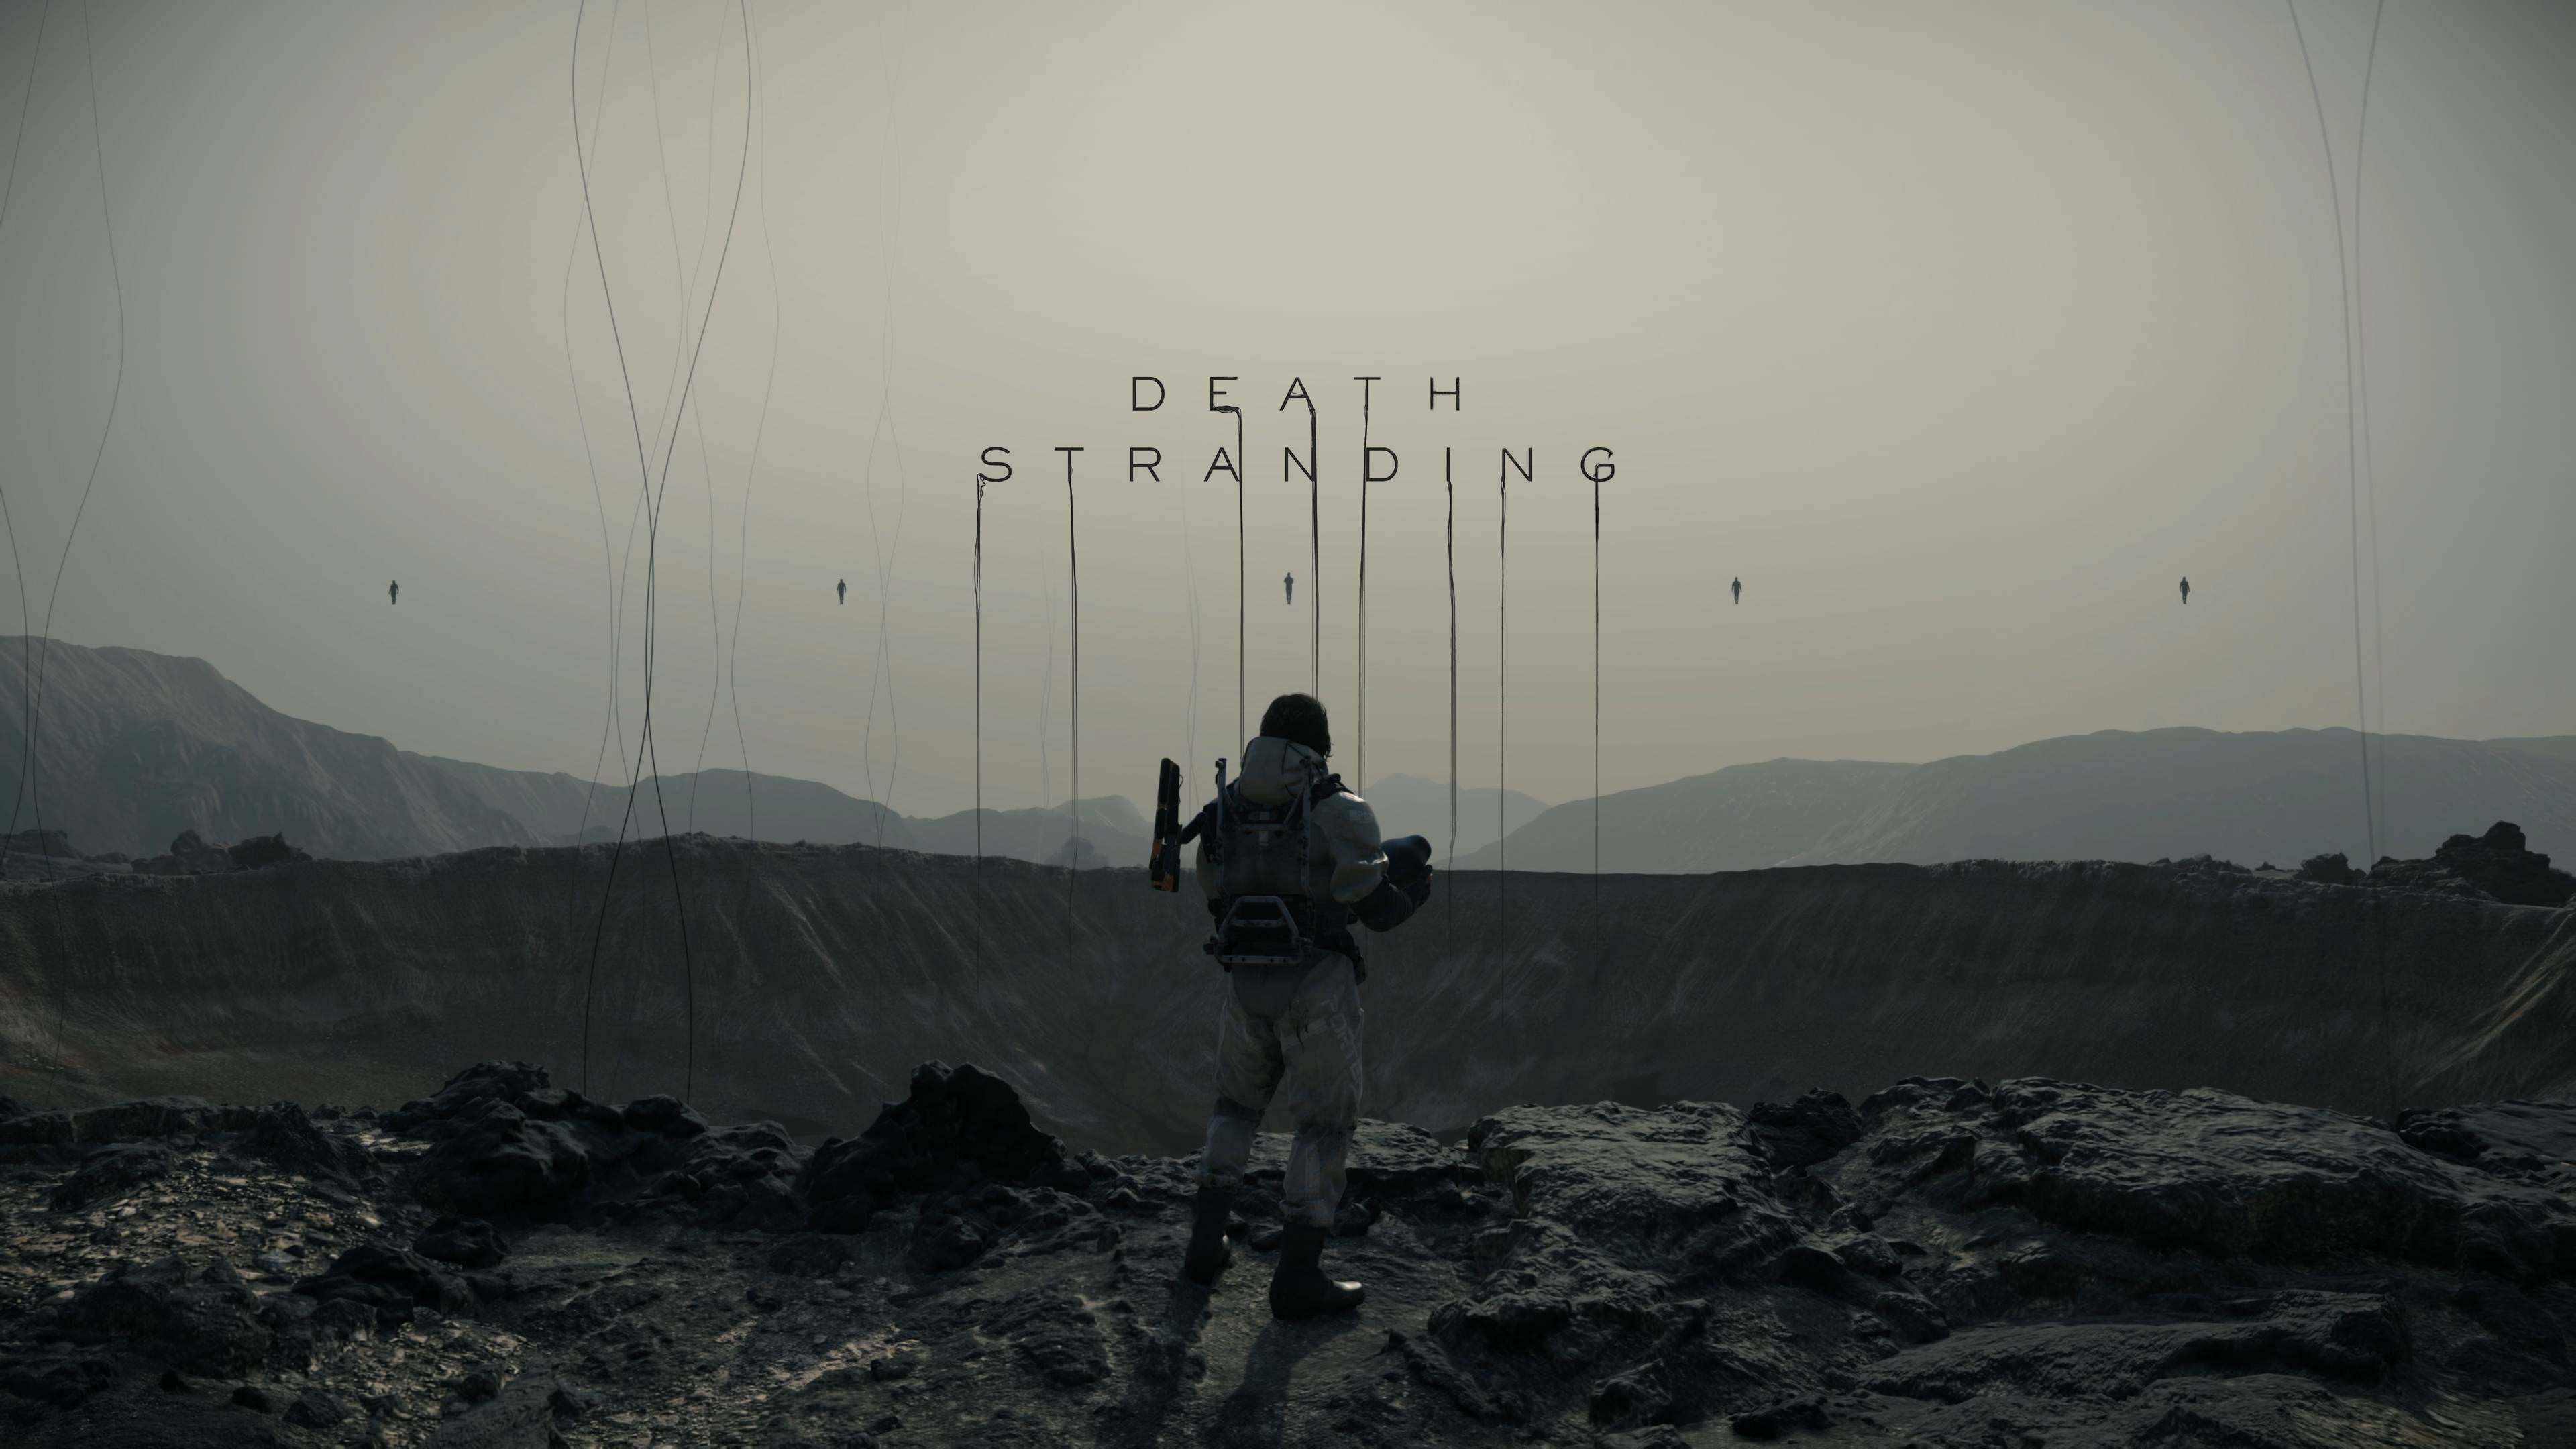 Bt's On The Crater Death Stranding Background